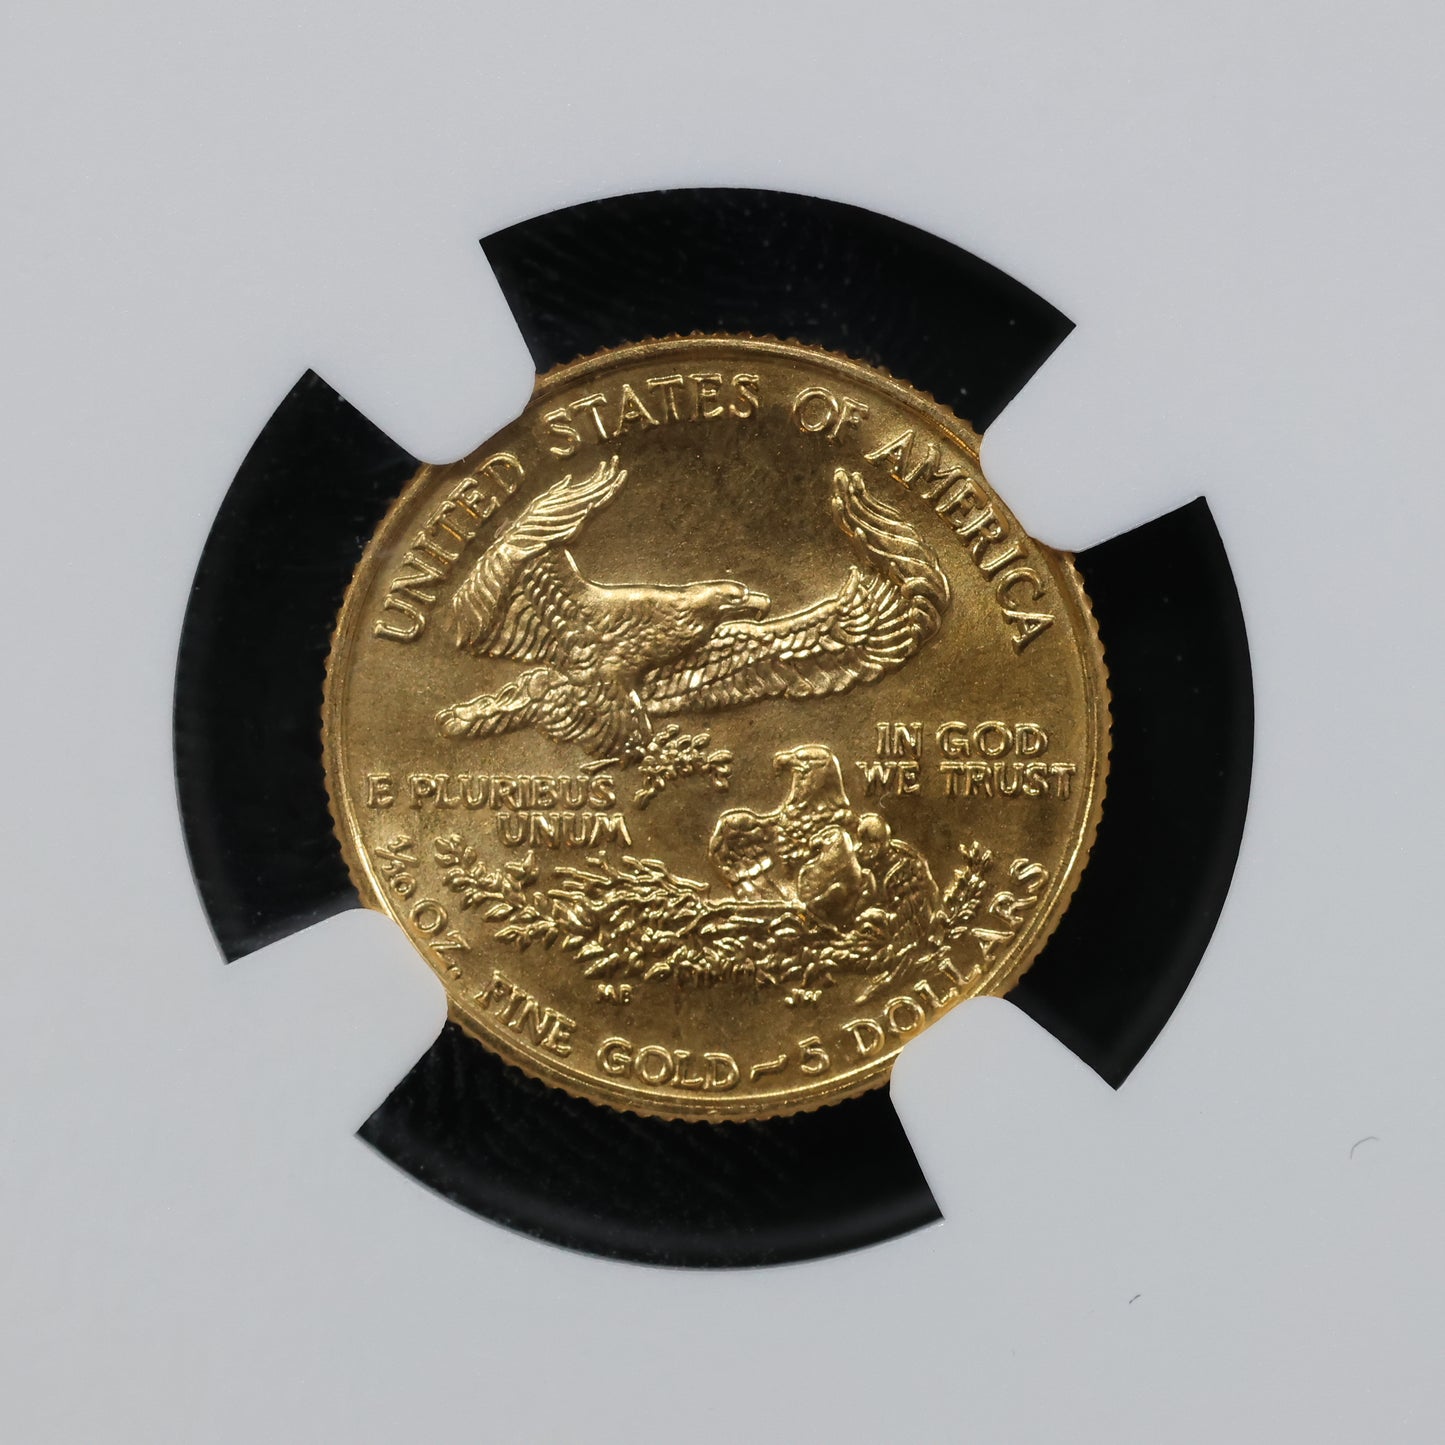 1989 1/10 oz Gold American Eagle 5$ Bullion Gold Coin - NGC MS 69